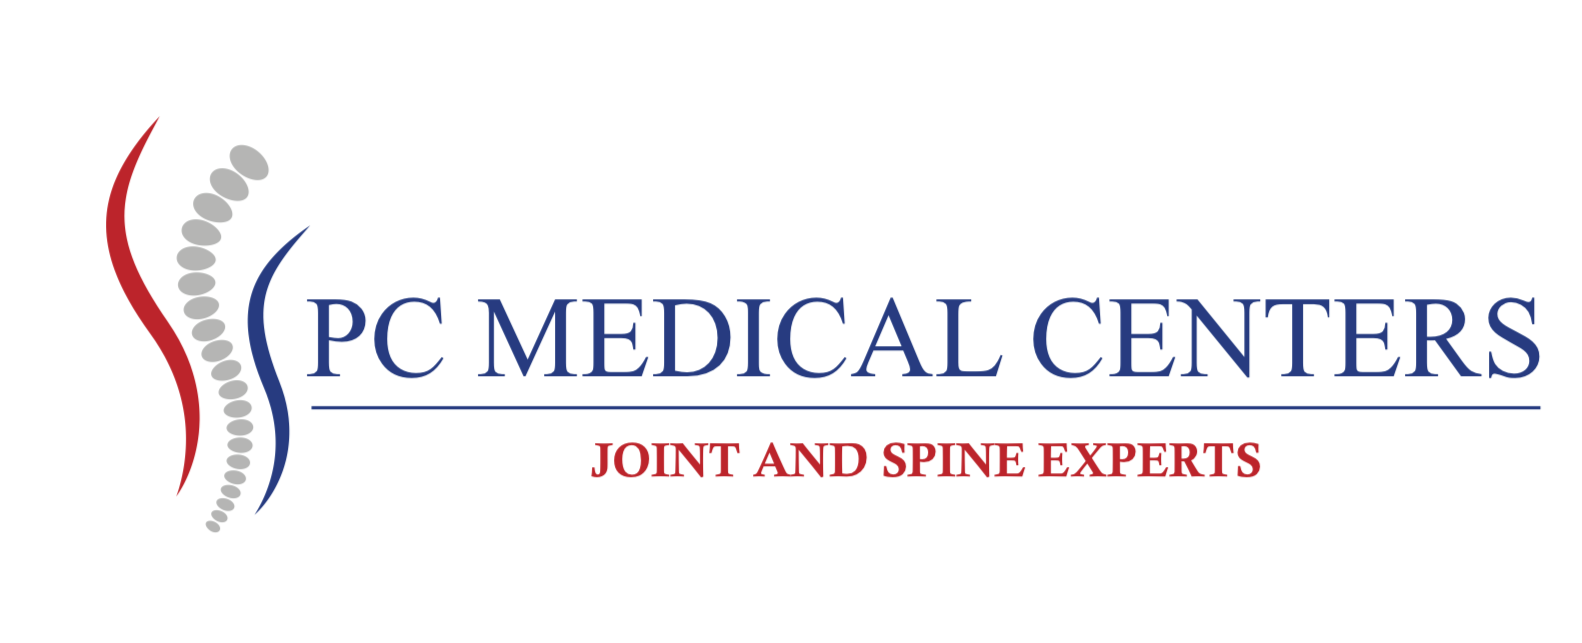 PC Medical Centers - Joint and Spine Experts